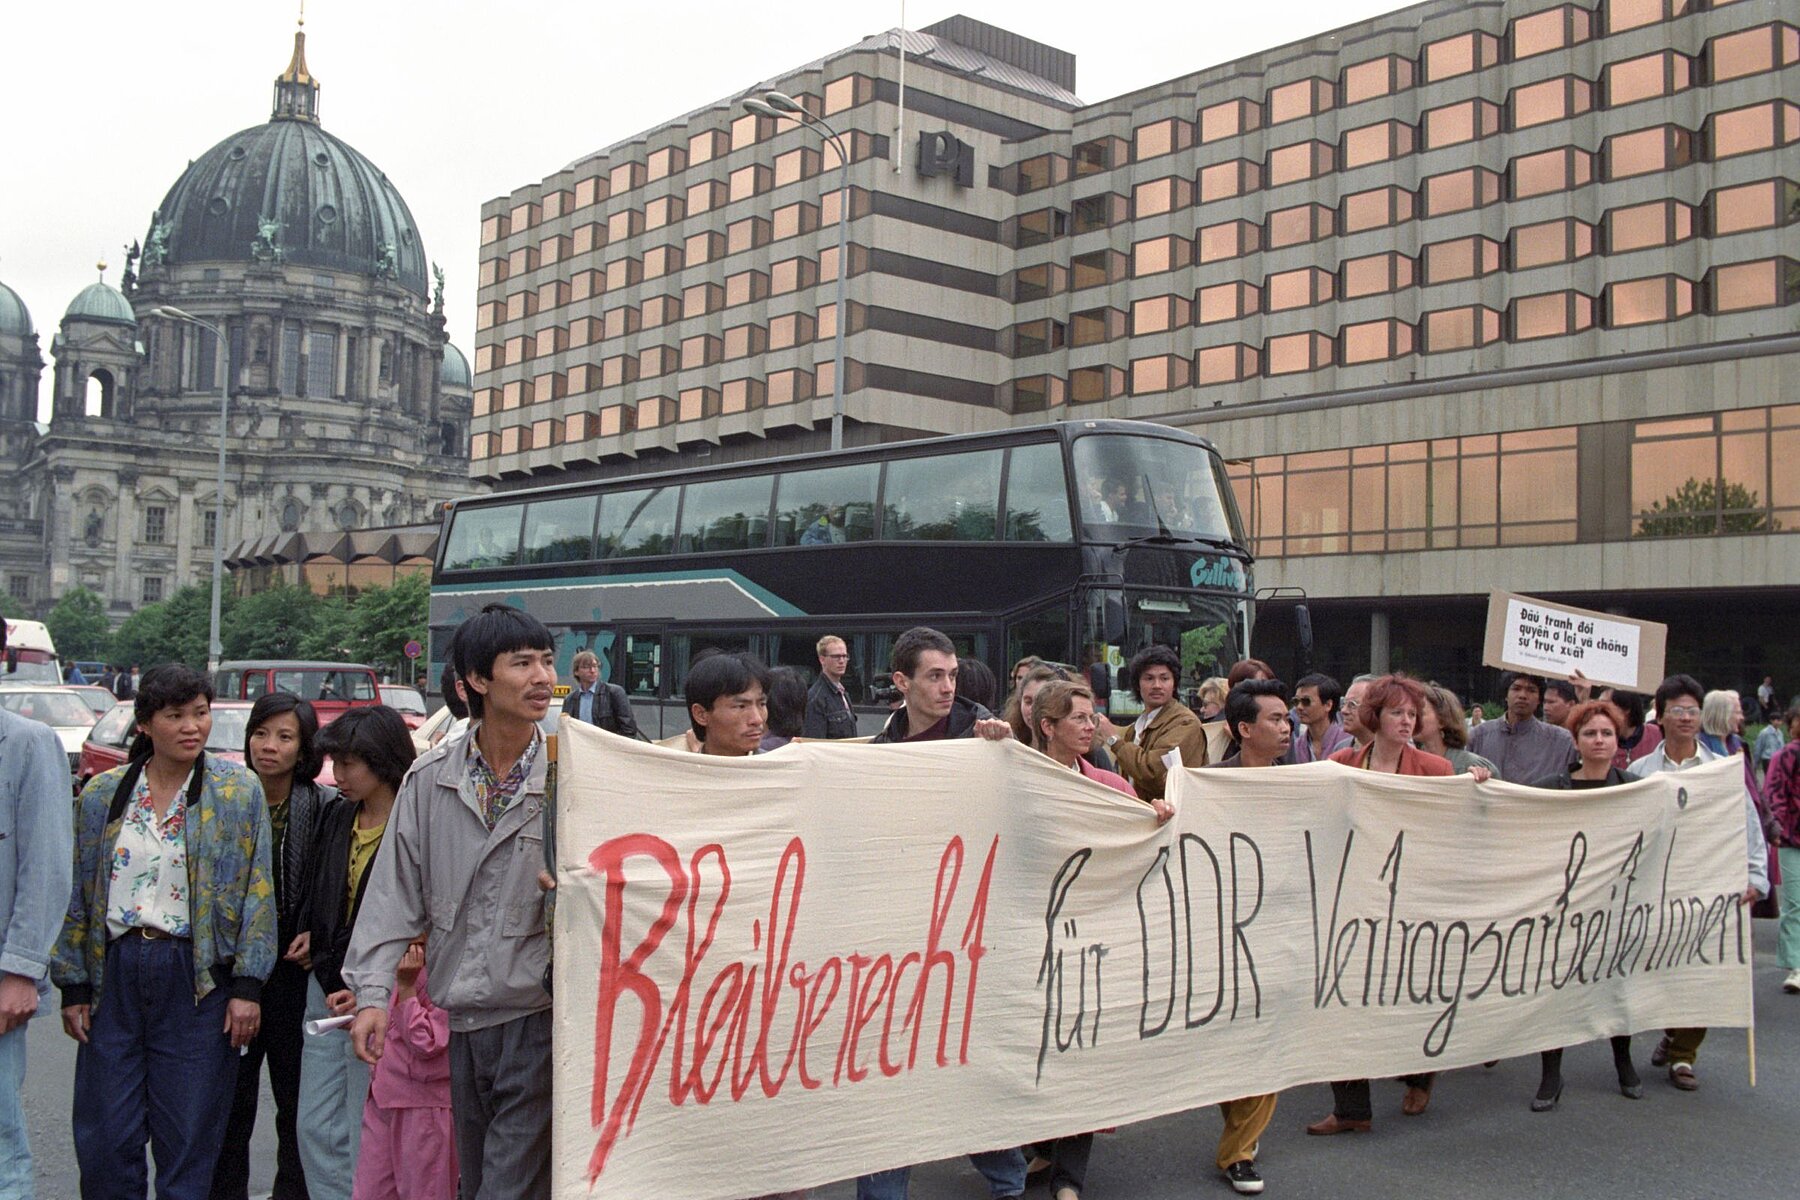 A group of people holds a banner that reads Bleiberecht für DDR VertragsarbeiterInnen, in  English Right to stay for GDR contract workers. To the right of them is a double-decker bus, behind it the Palasthotel, in English Palace Hotel. The Berlin Cathedral looms in the background of the picture. 